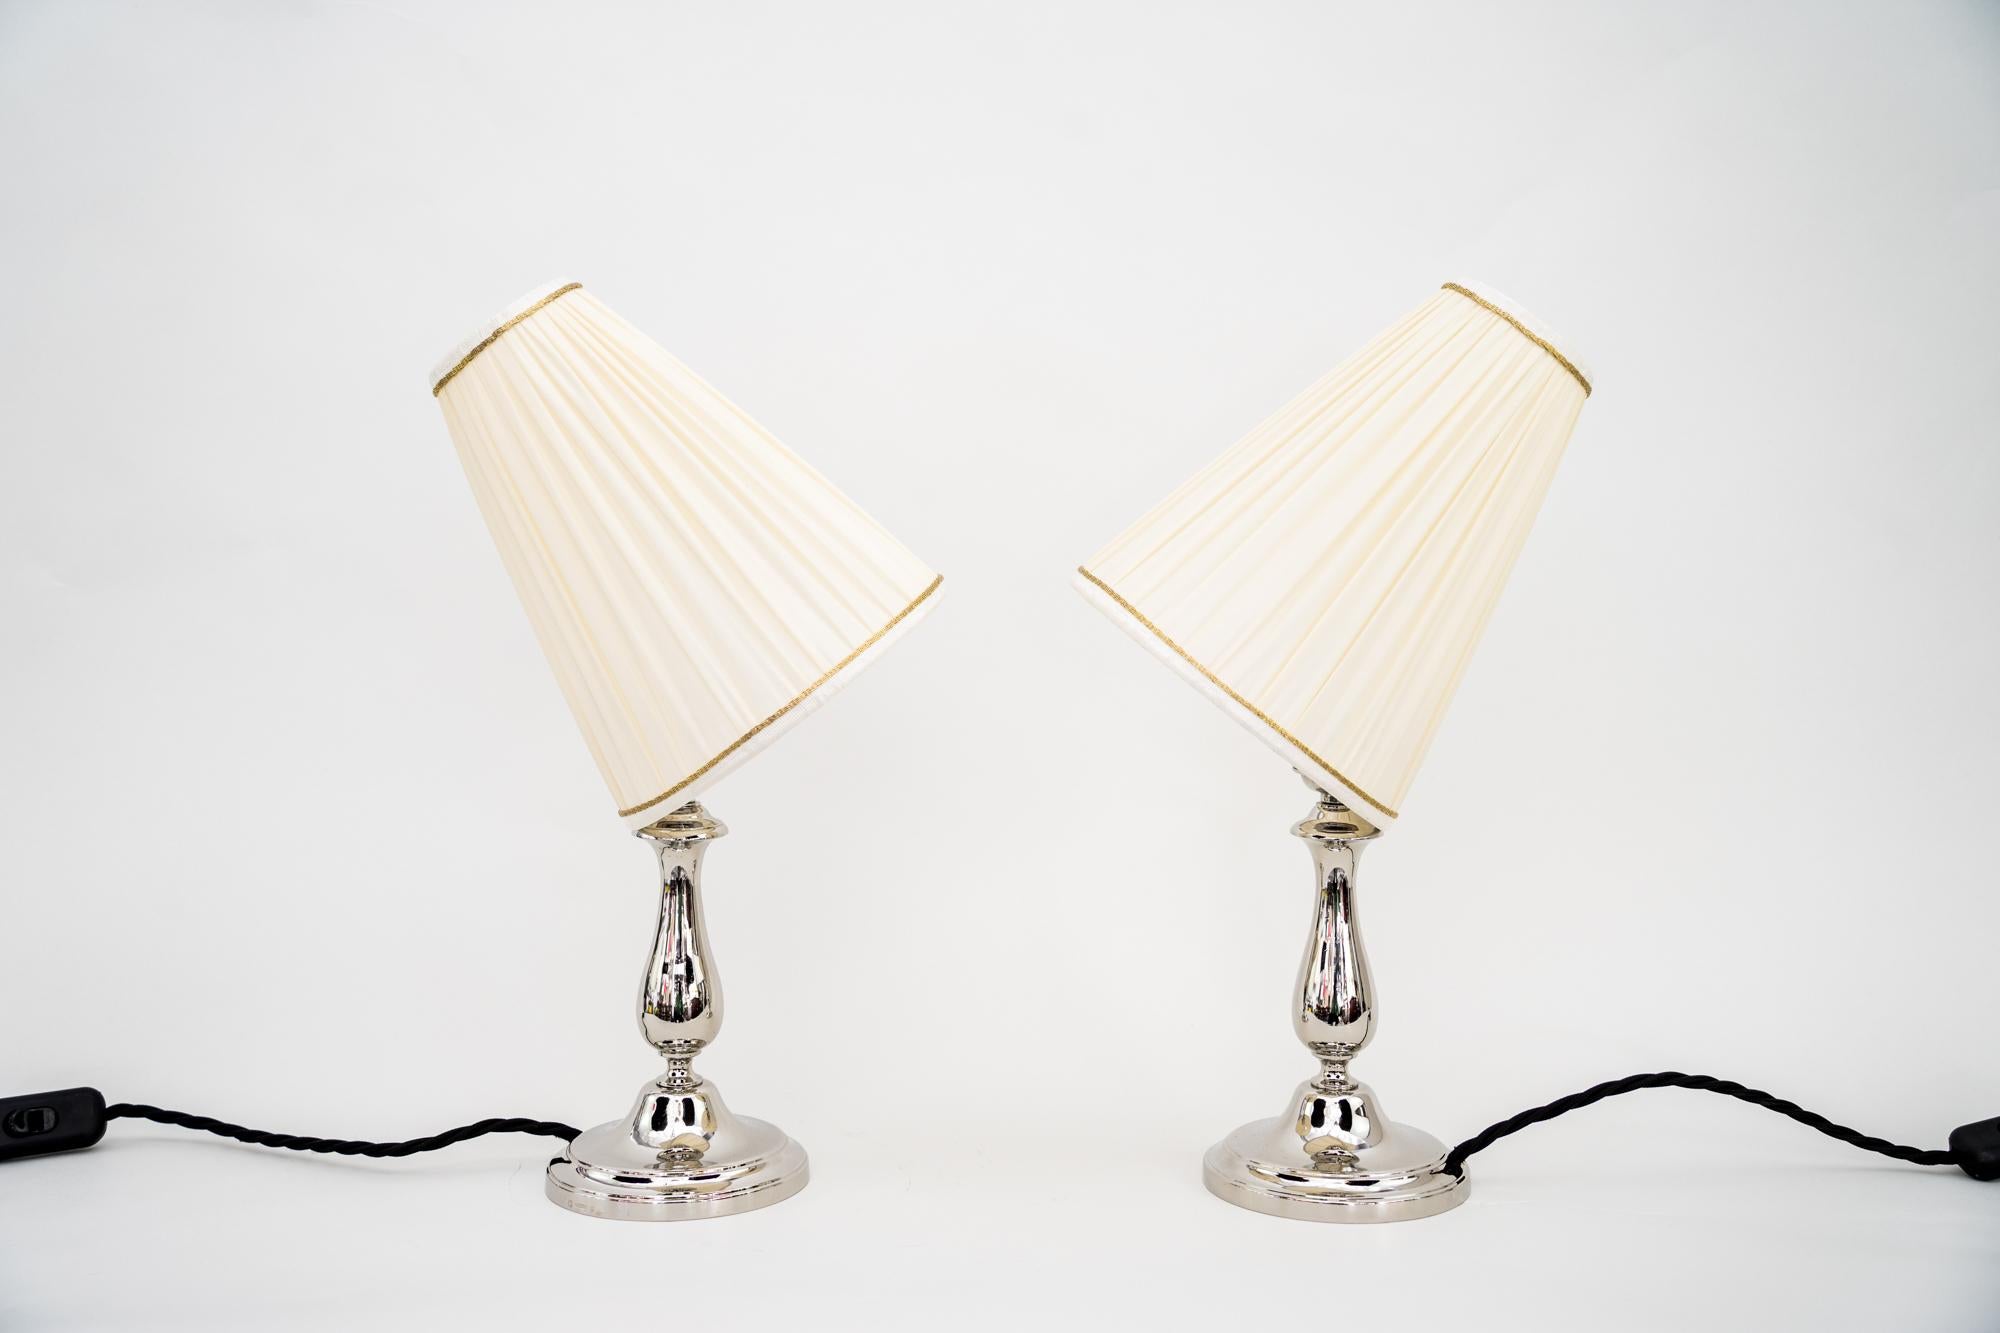 Art Deco 2 Nickel-Plated Table Lamps Vienna around 1920s